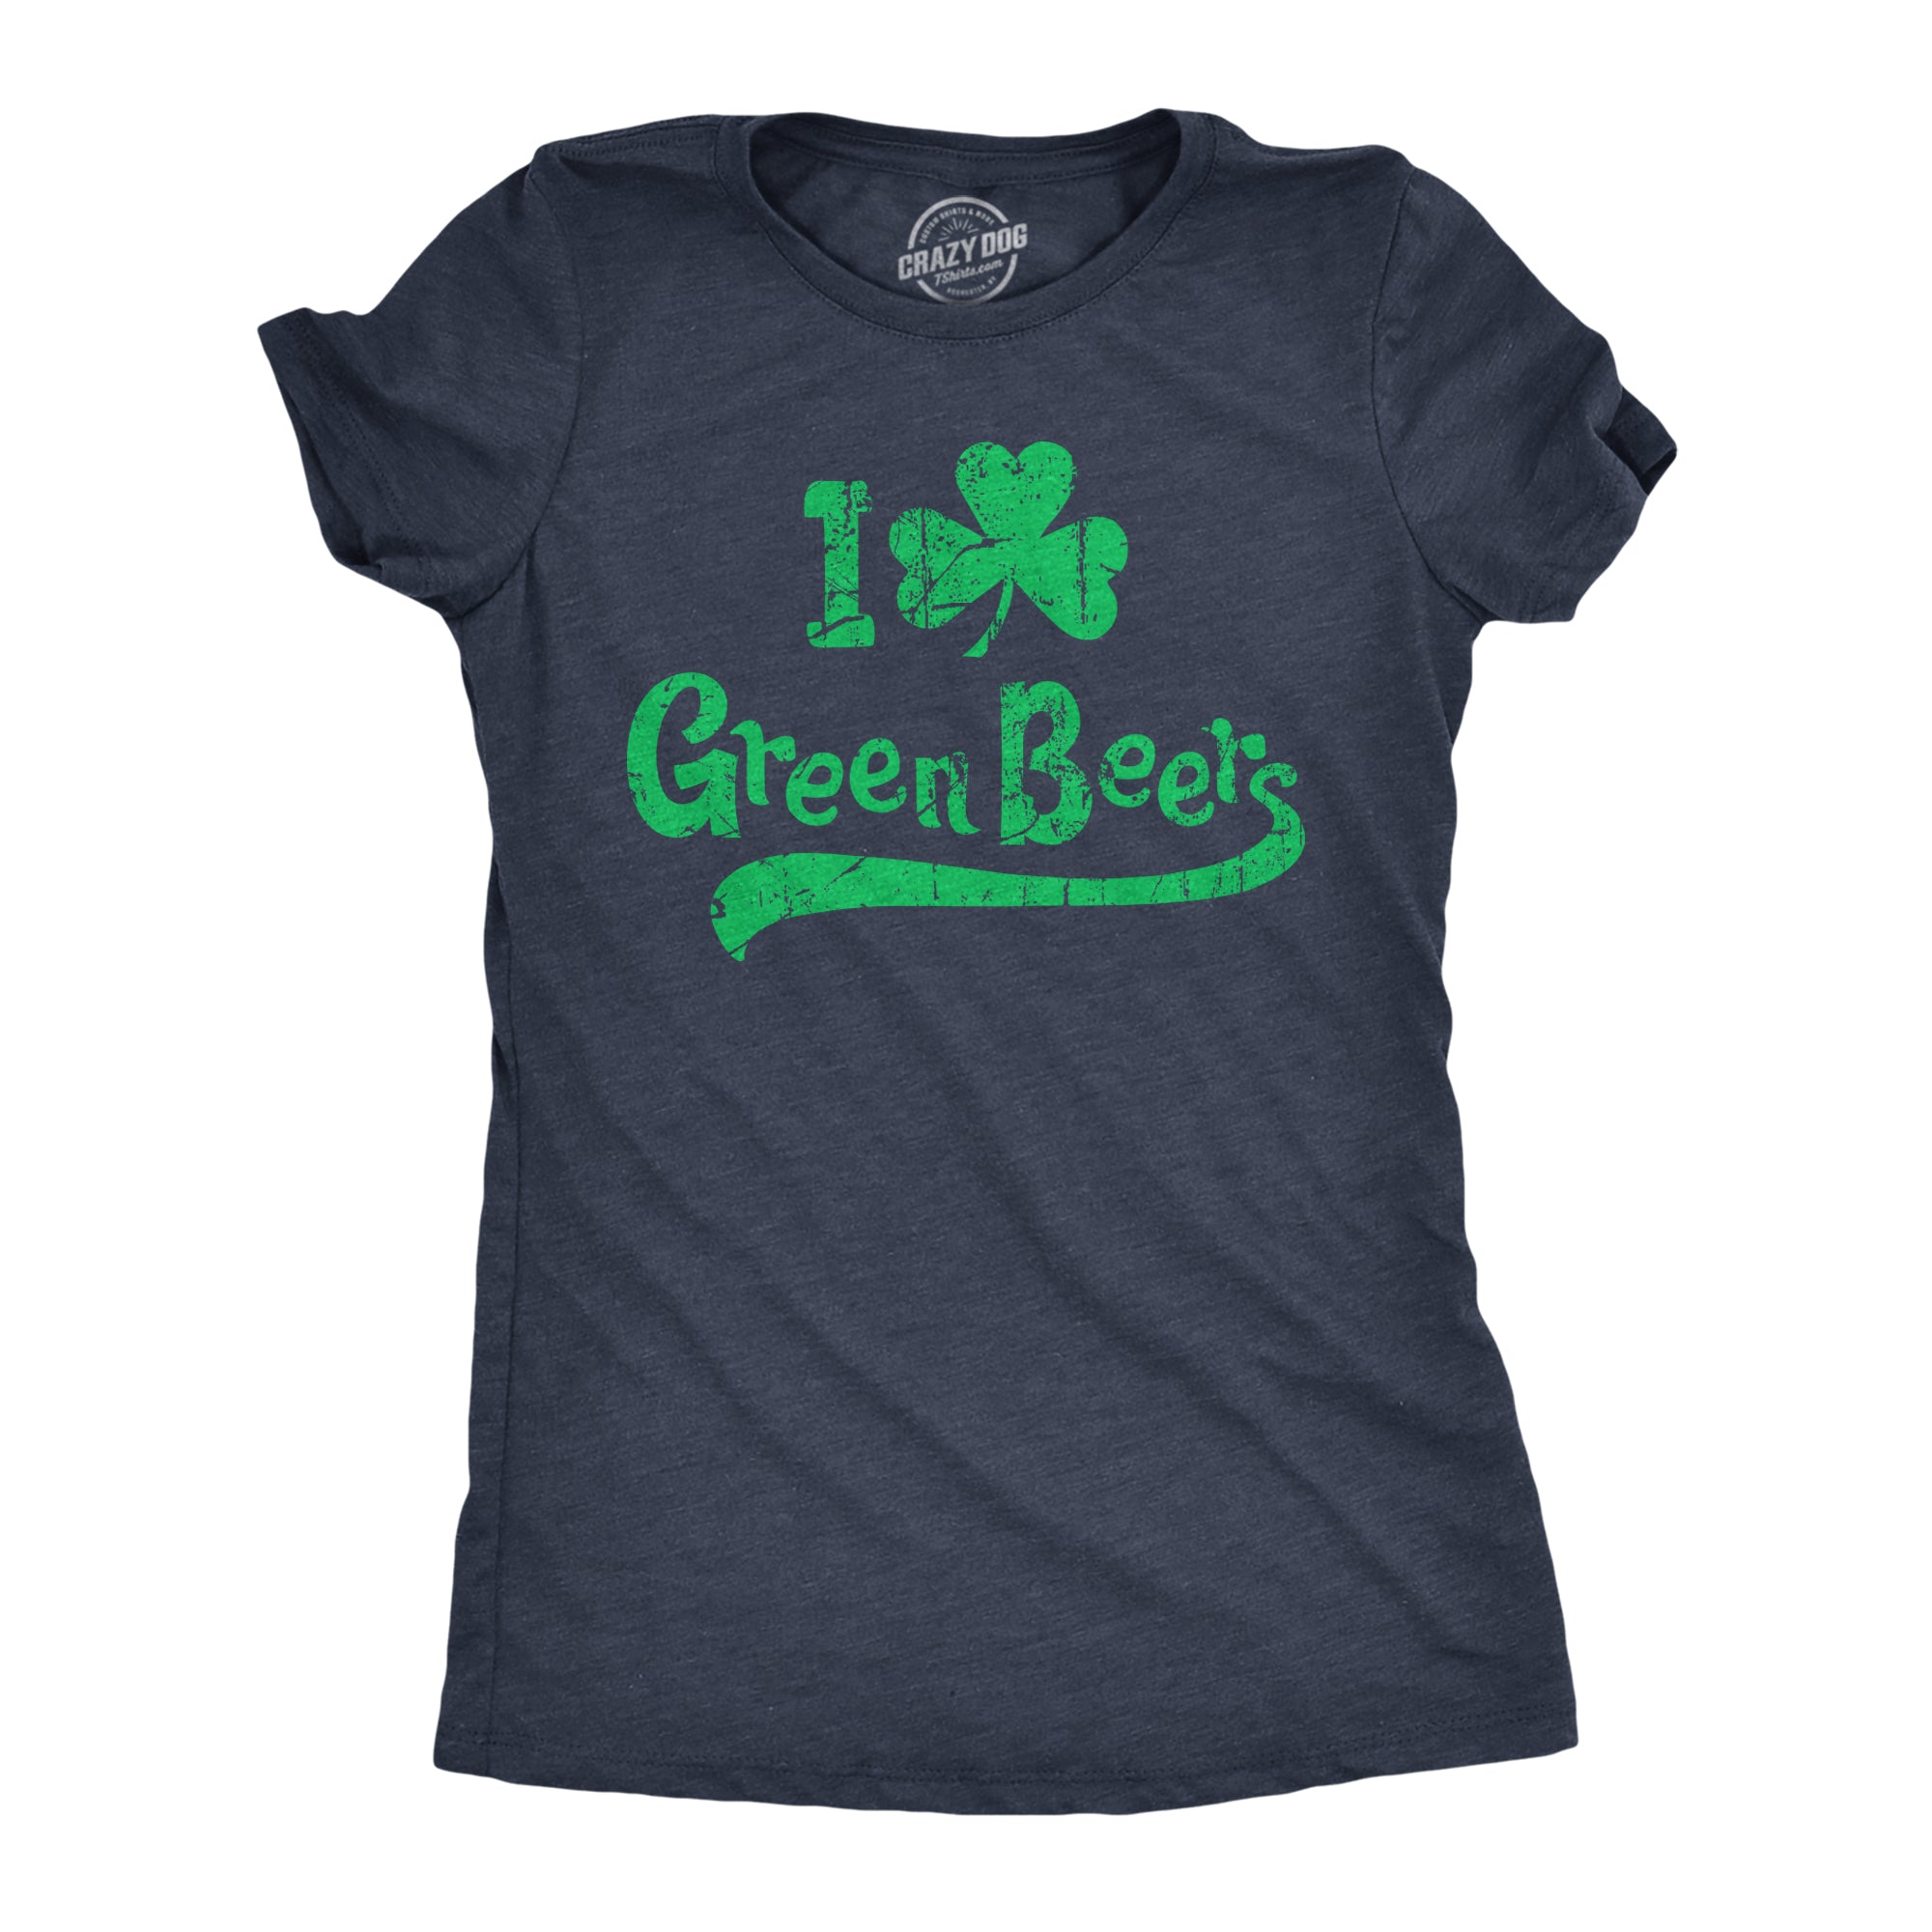 Funny Heather Navy I Clover Green Beers Womens T Shirt Nerdy Saint Patrick's Day Beer Drinking Tee